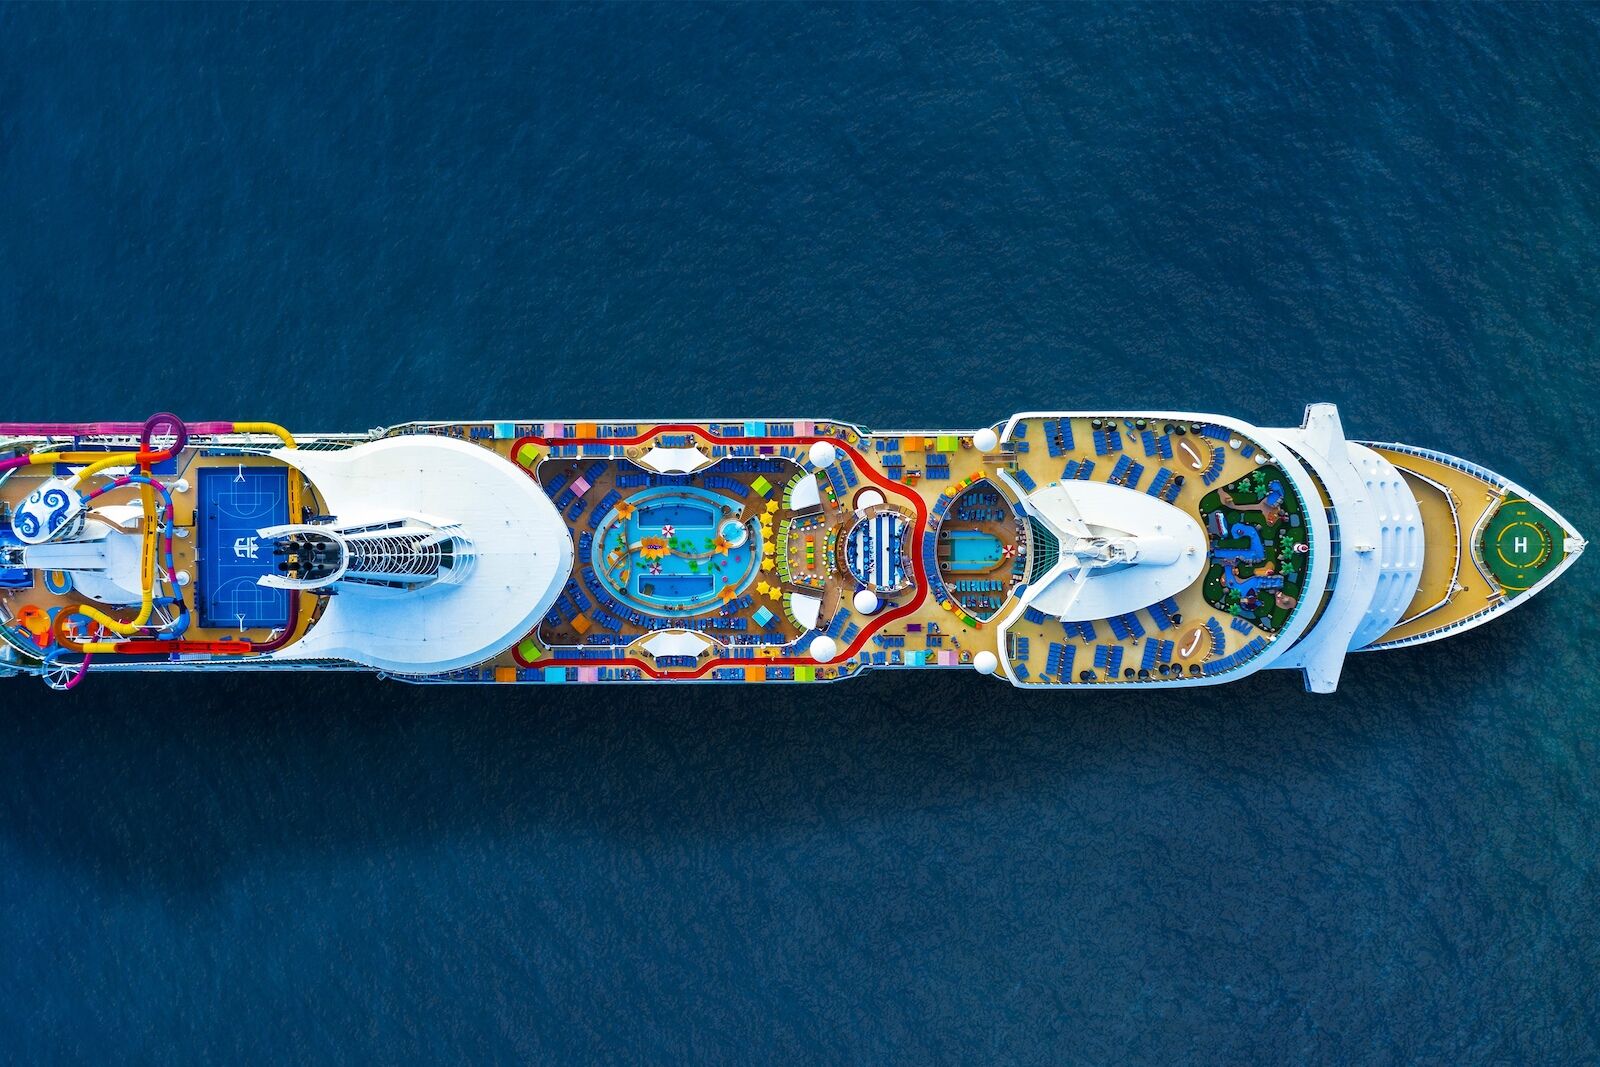 View from above of Royal Caribbean's latest cruise ship: The Navigator of the Seas